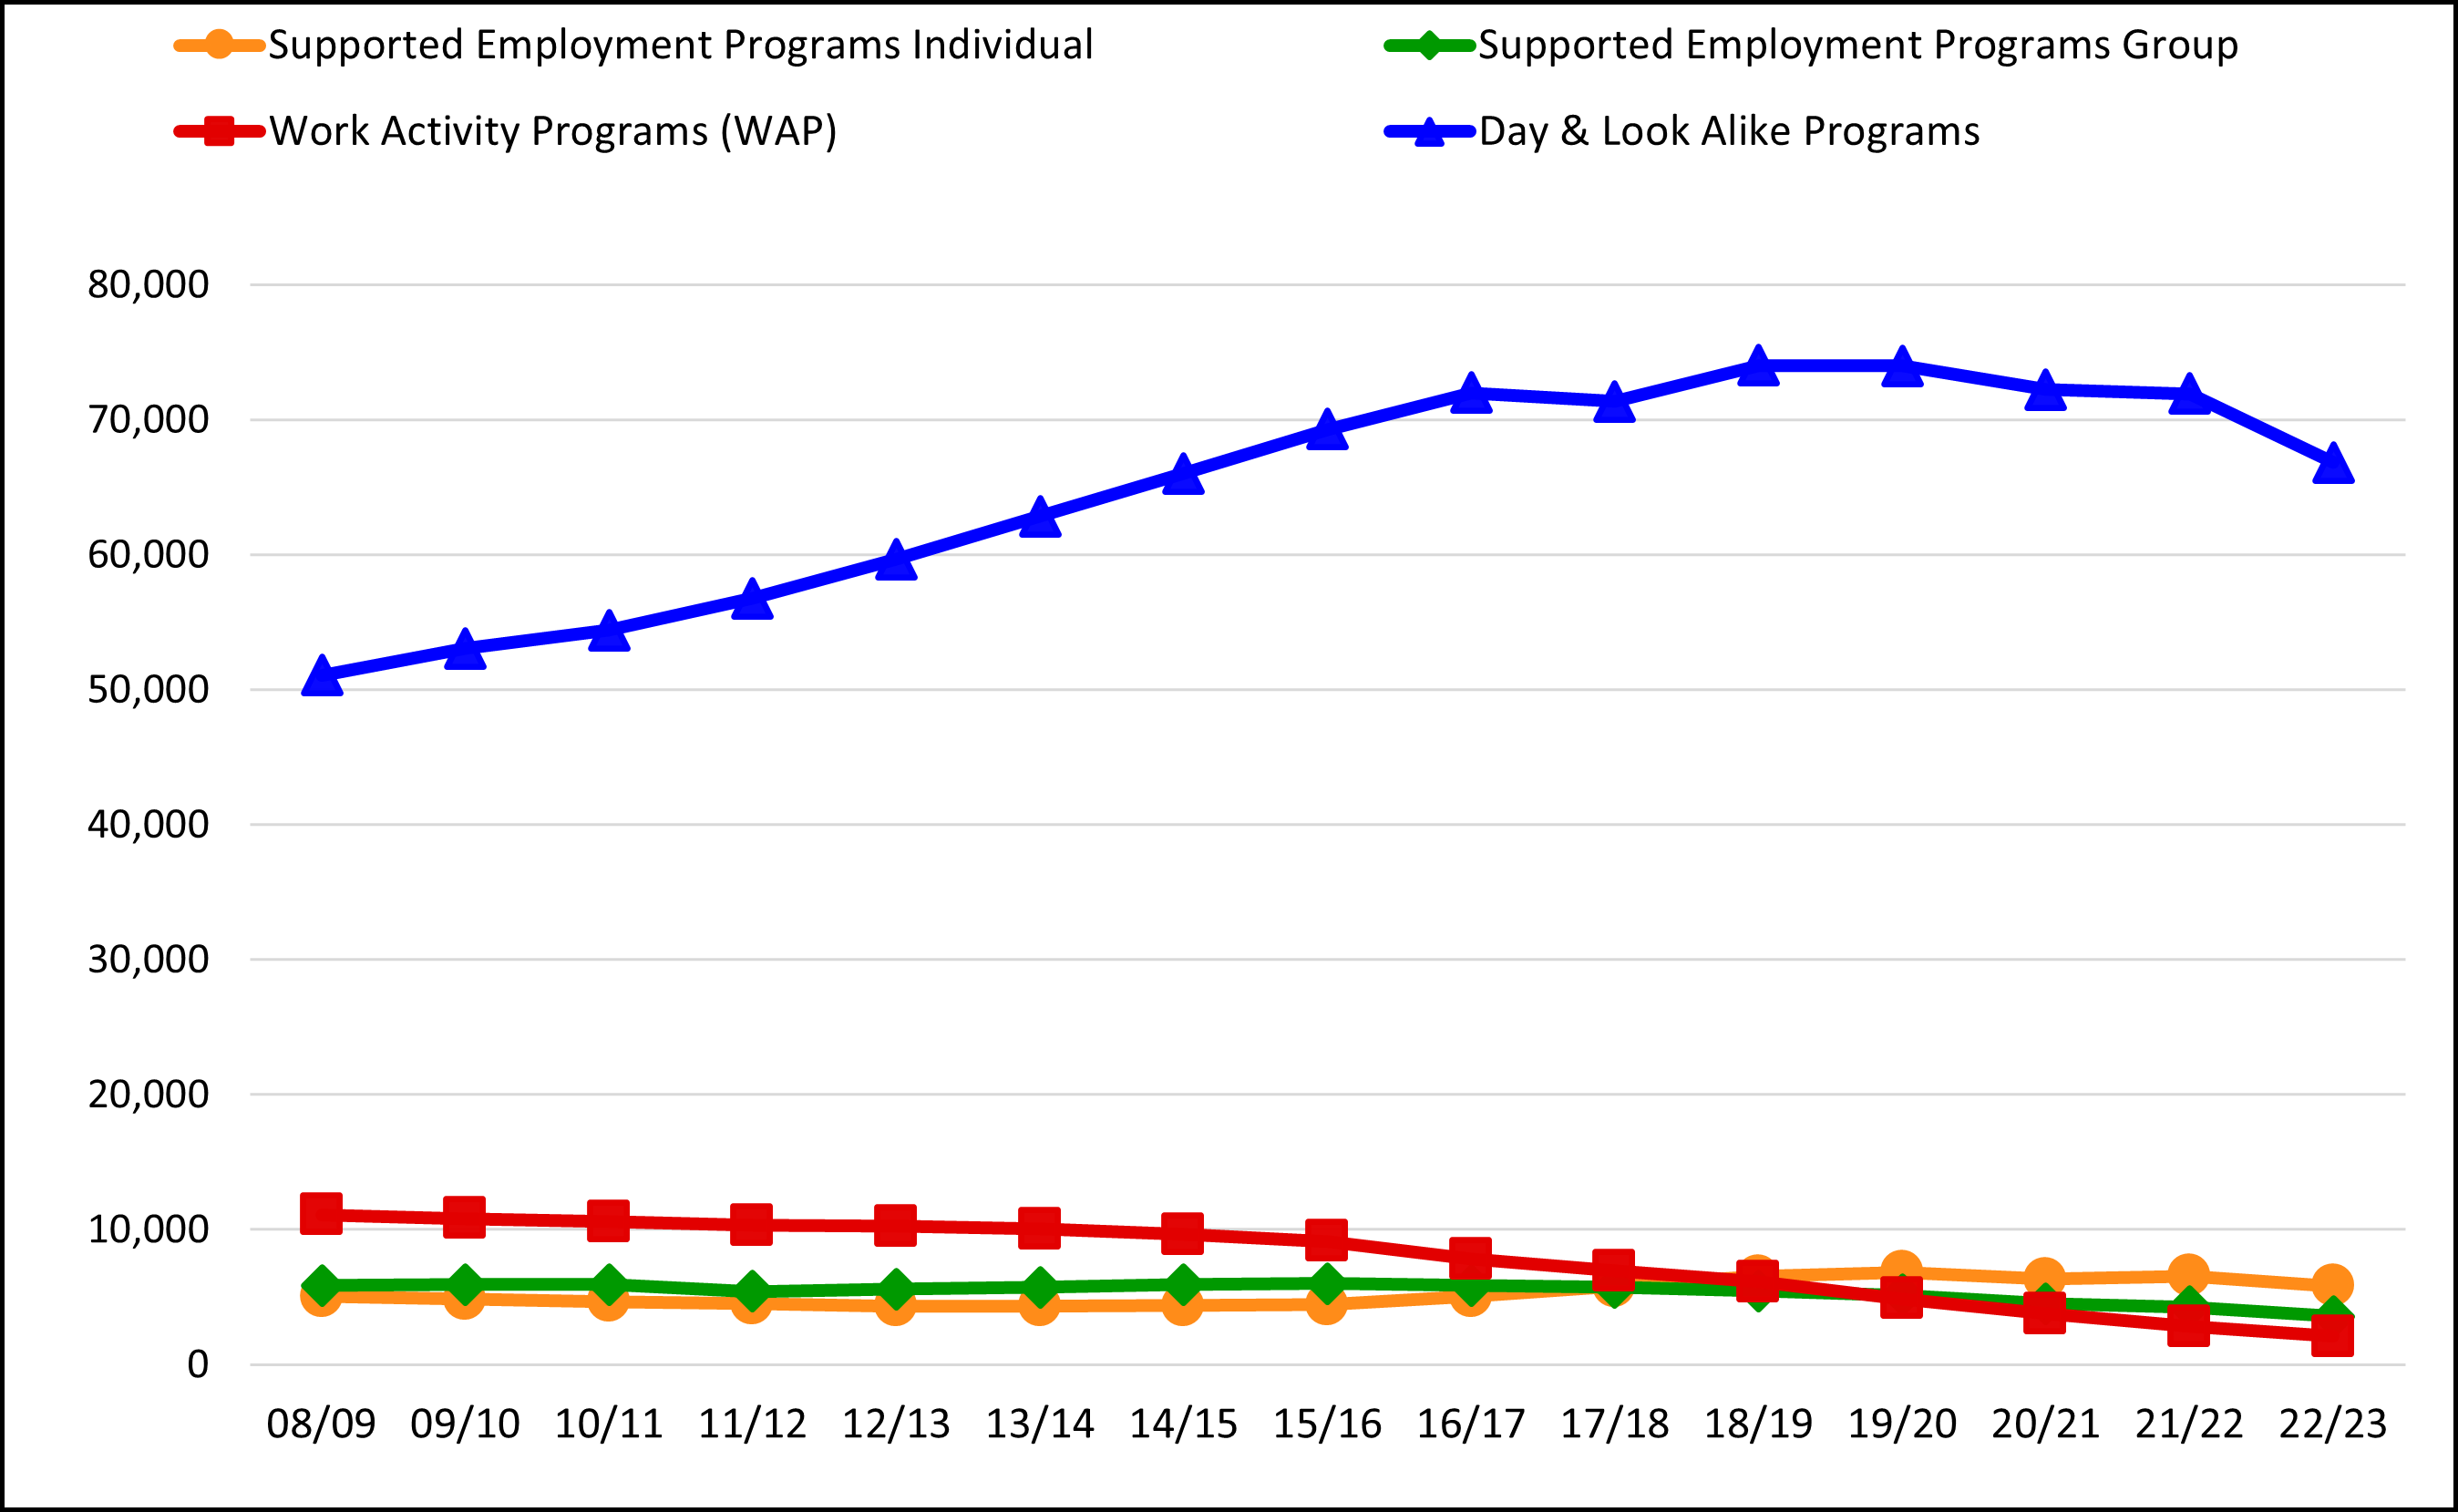 Line graph shows that integrated employment options are not going up, sheltered work is going down slowly, and day and look alike programs are increasing rapidly.